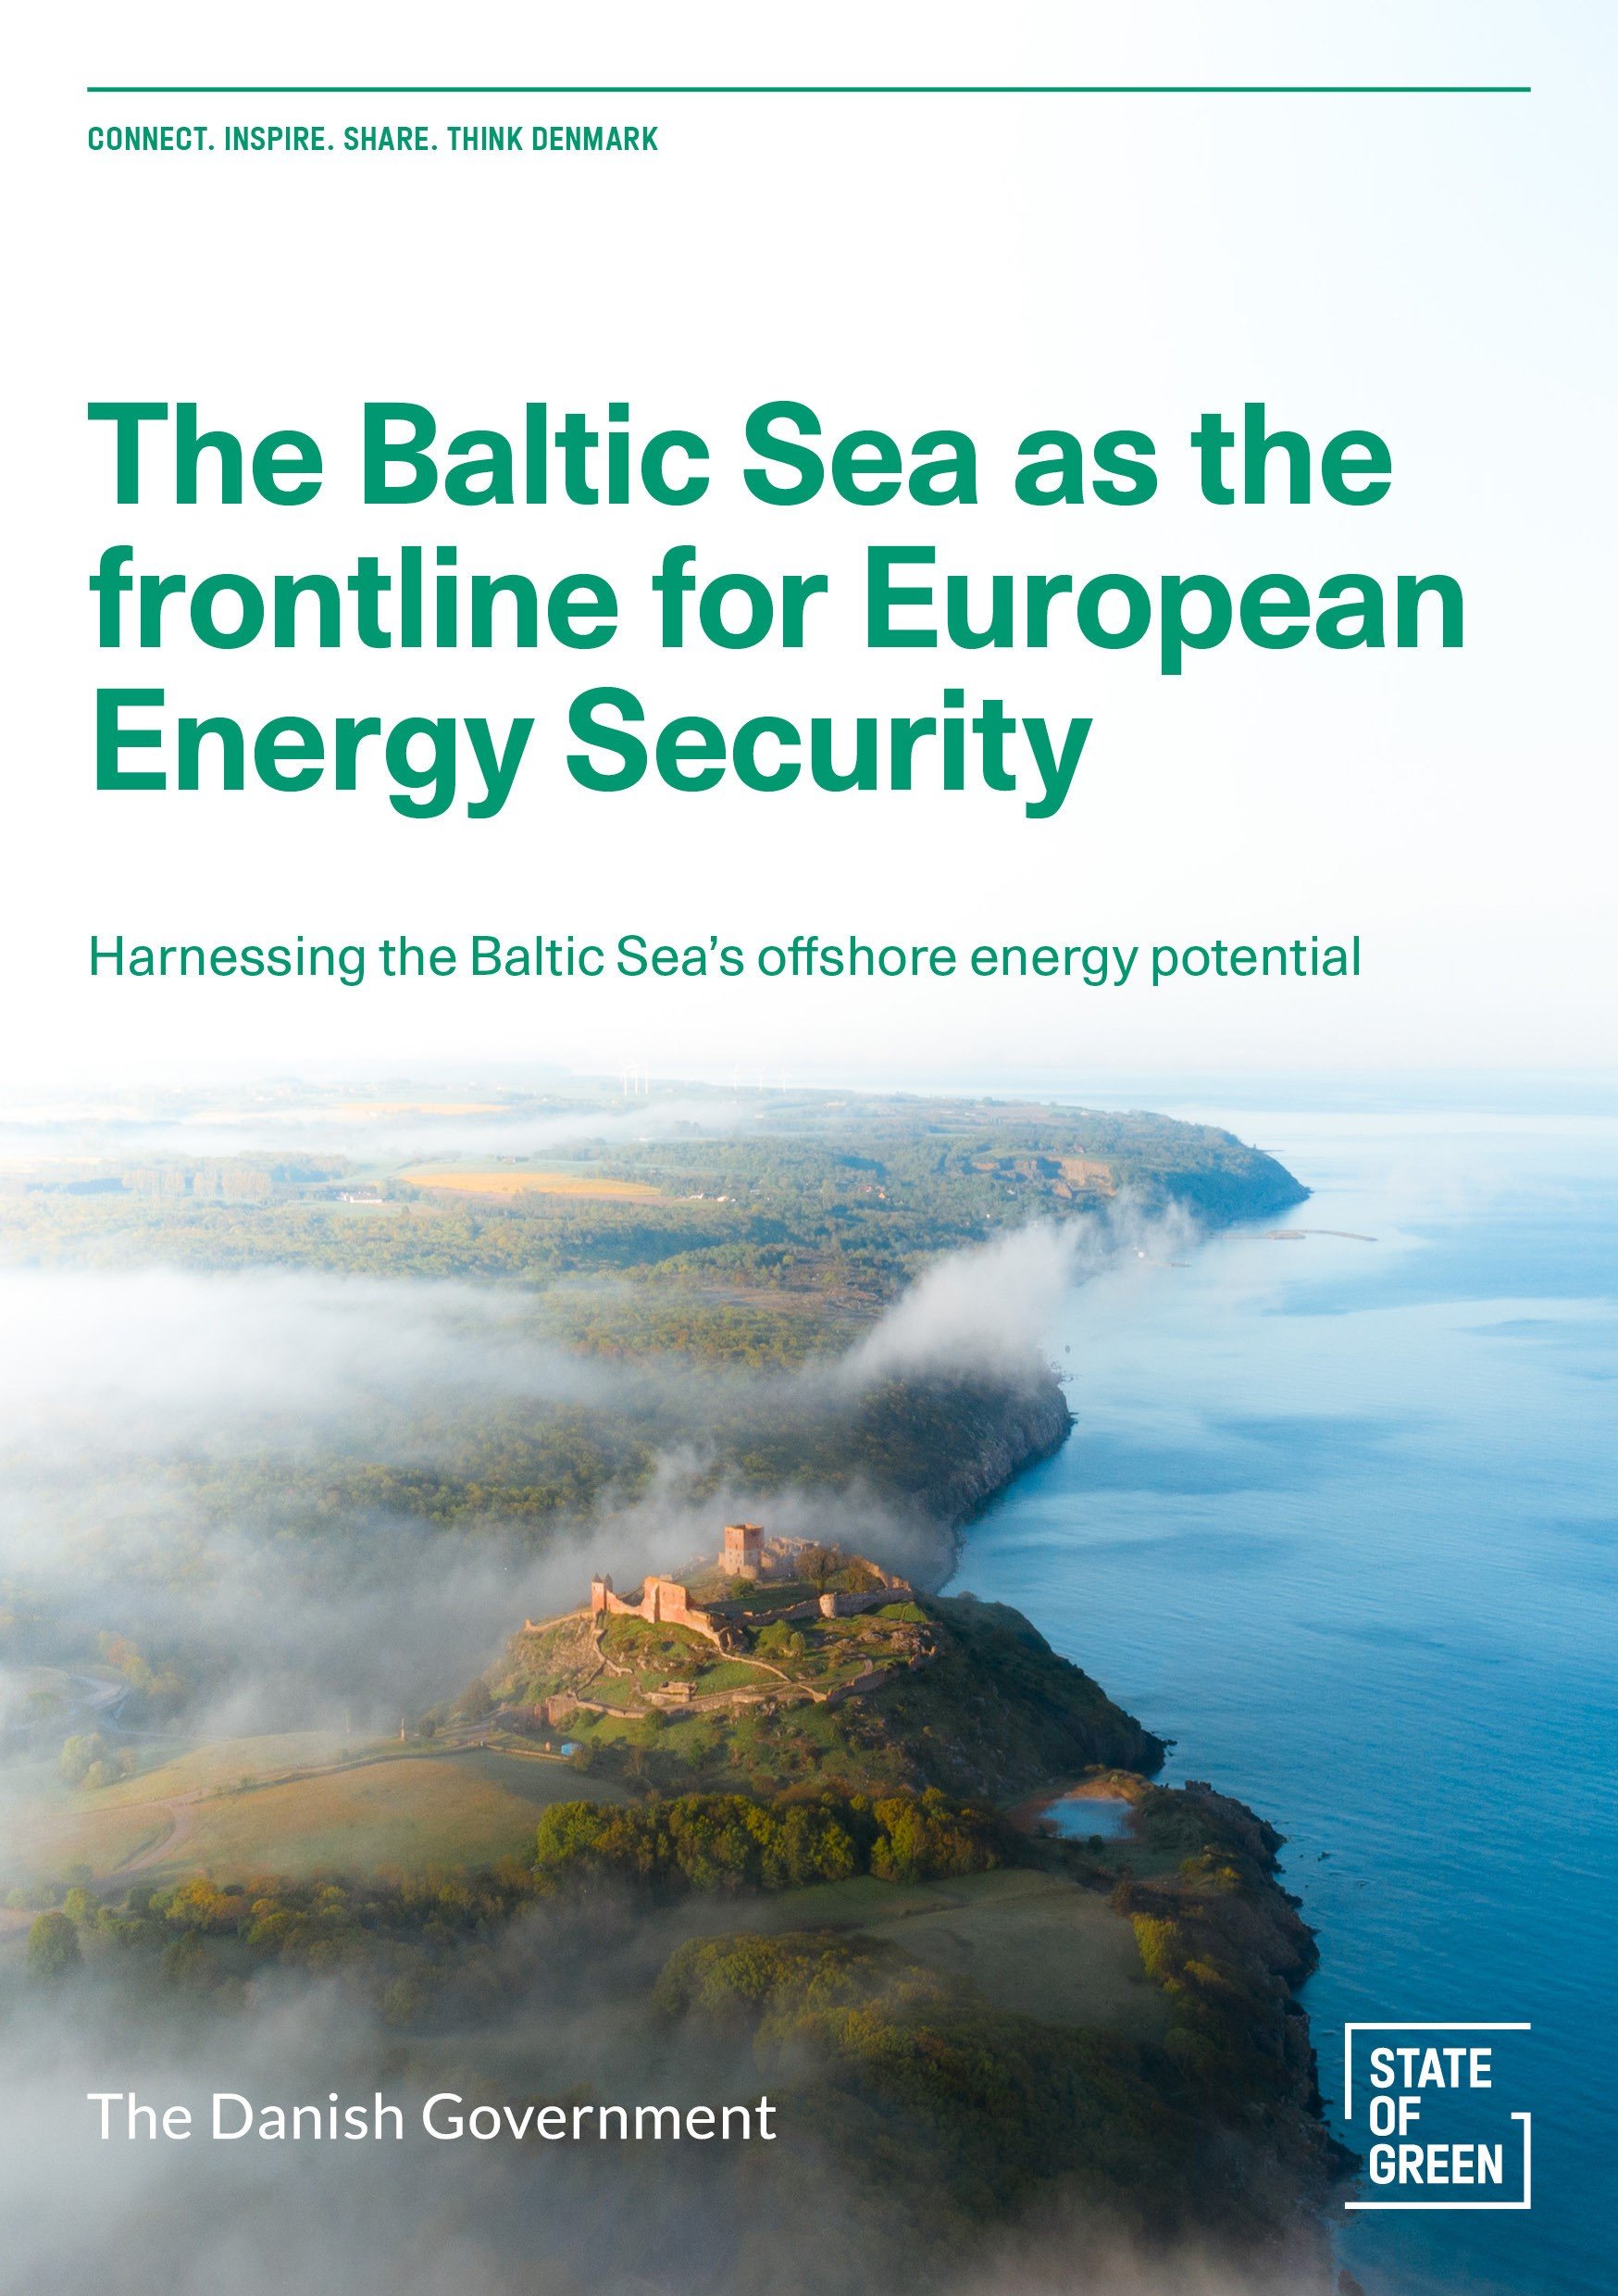 Harnessing the Baltic Sea’s offshore energy potential